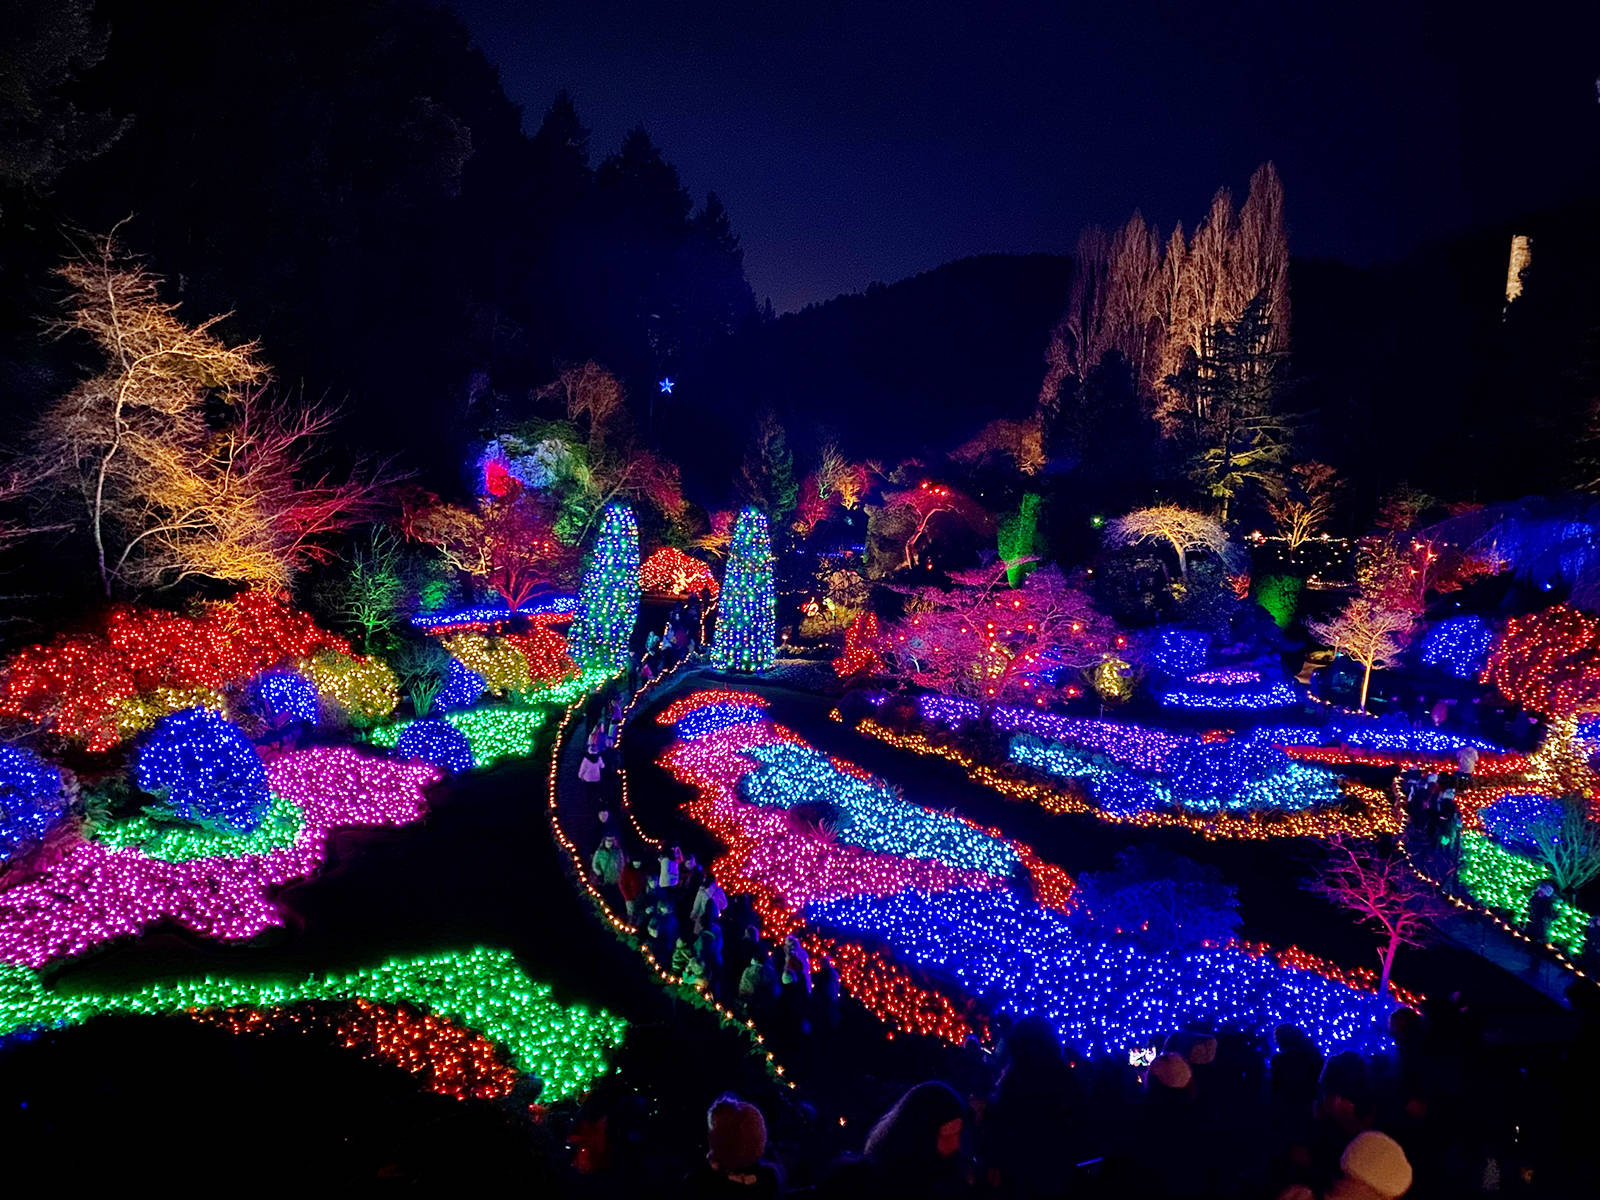 The Sunken Garden is one of the most-photographed parts of The Butchart Gardens no matter what the season. Jen Blyth photo.